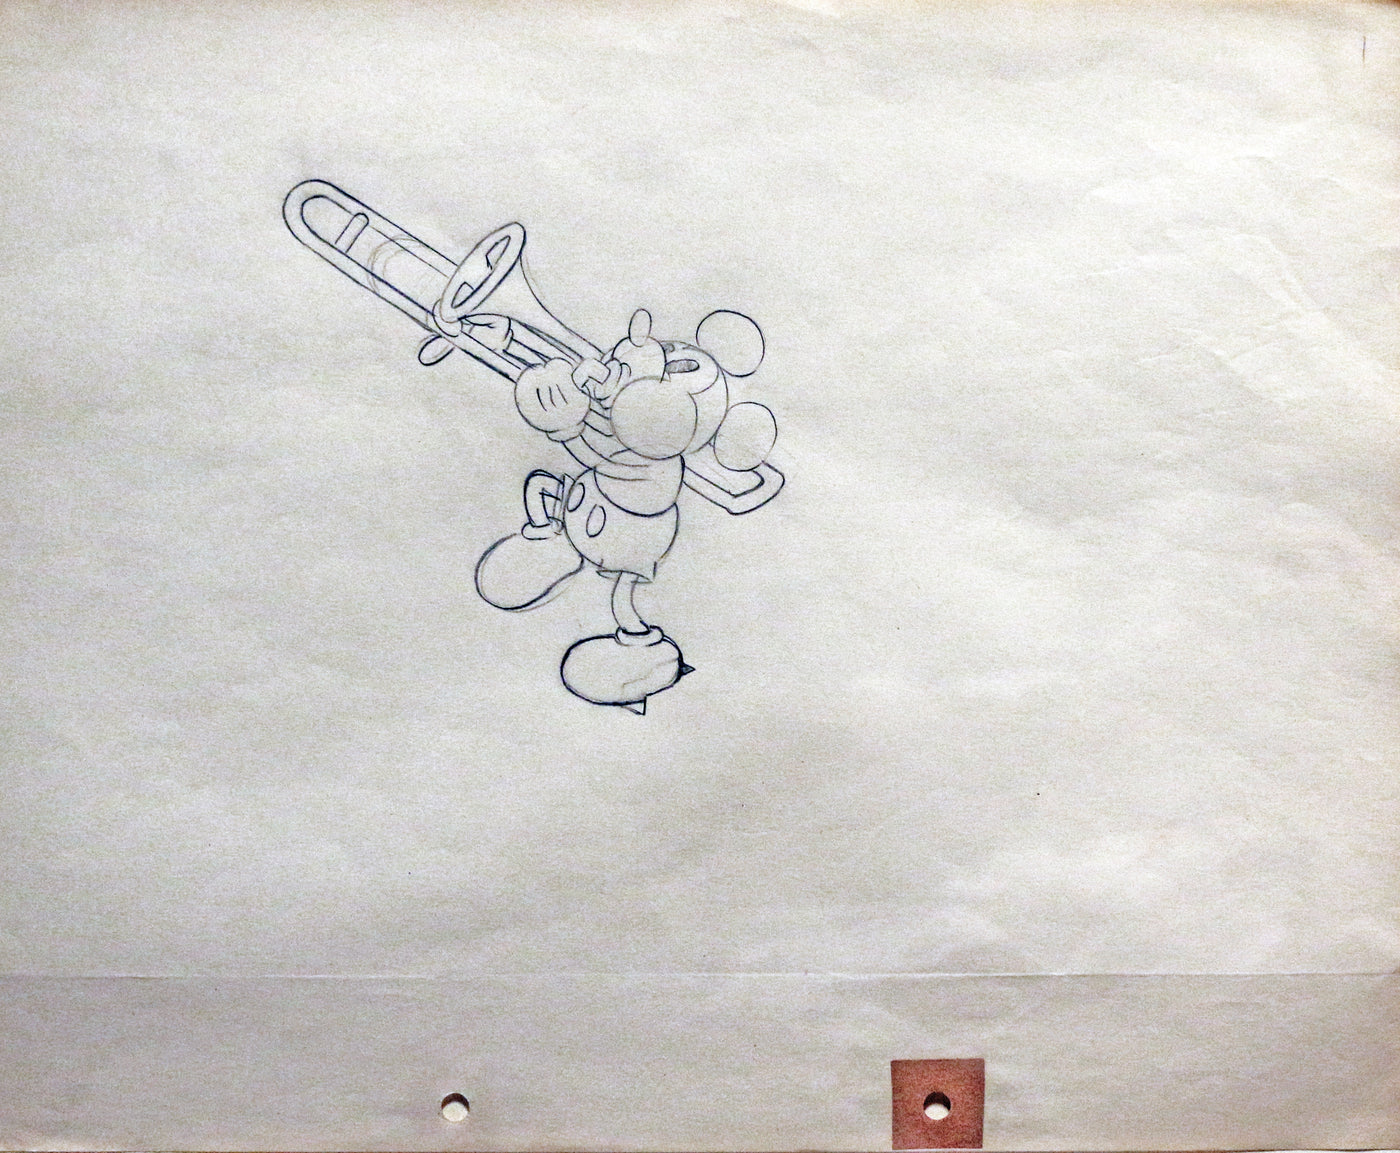 Original Walt Disney Production Drawing of Mickey Mouse from The Delivery Boy (1931)